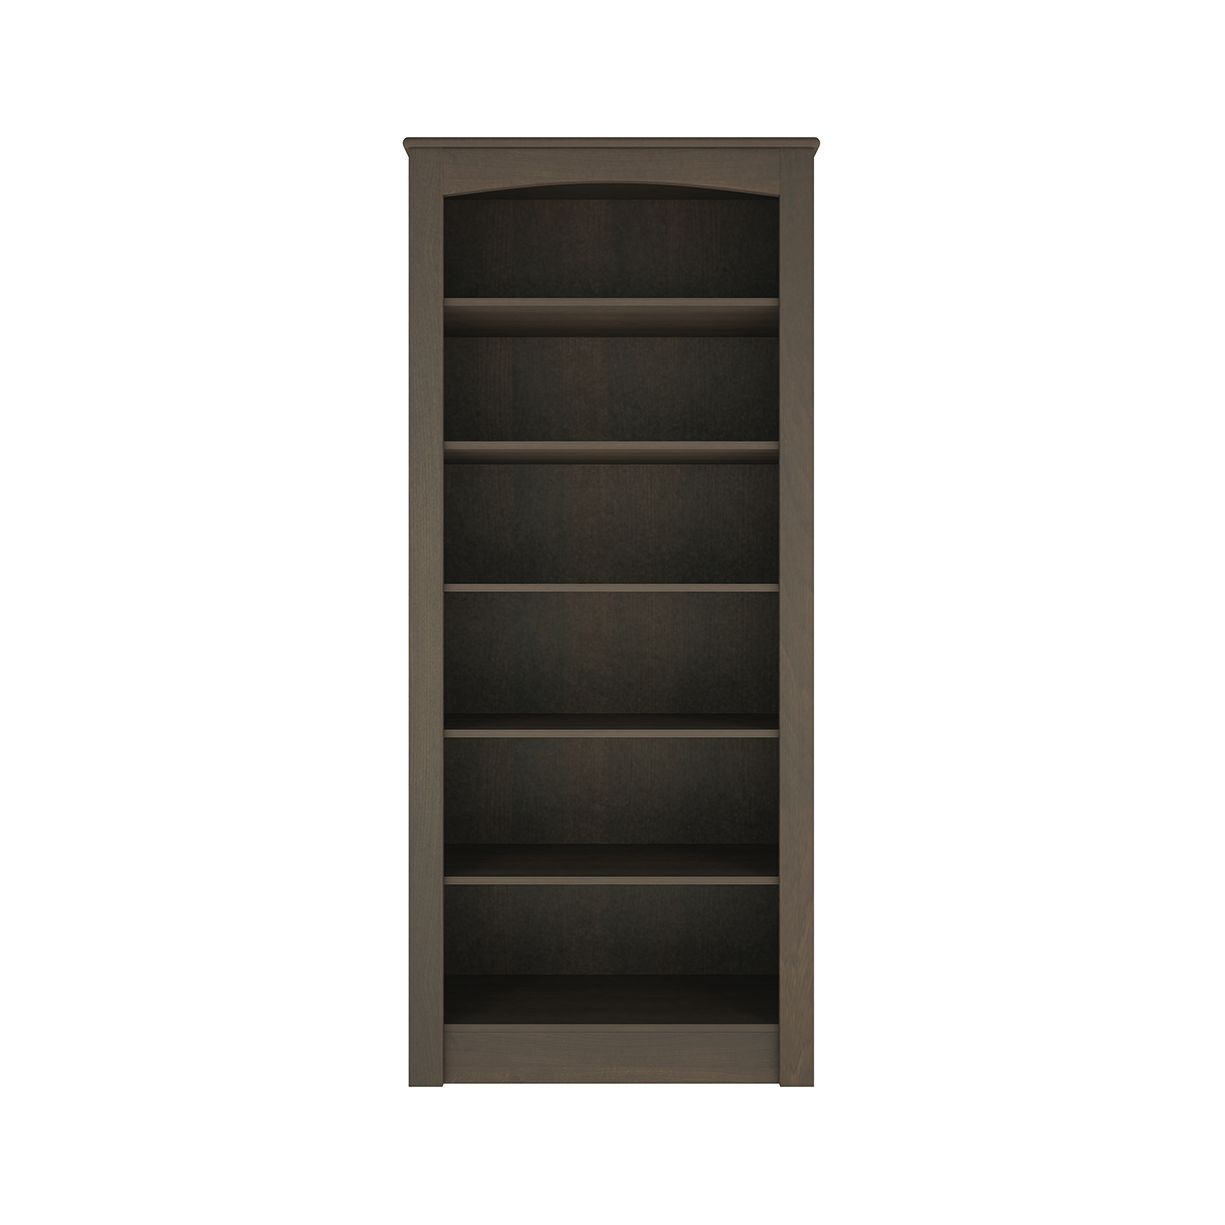 Living Tall Bookcase